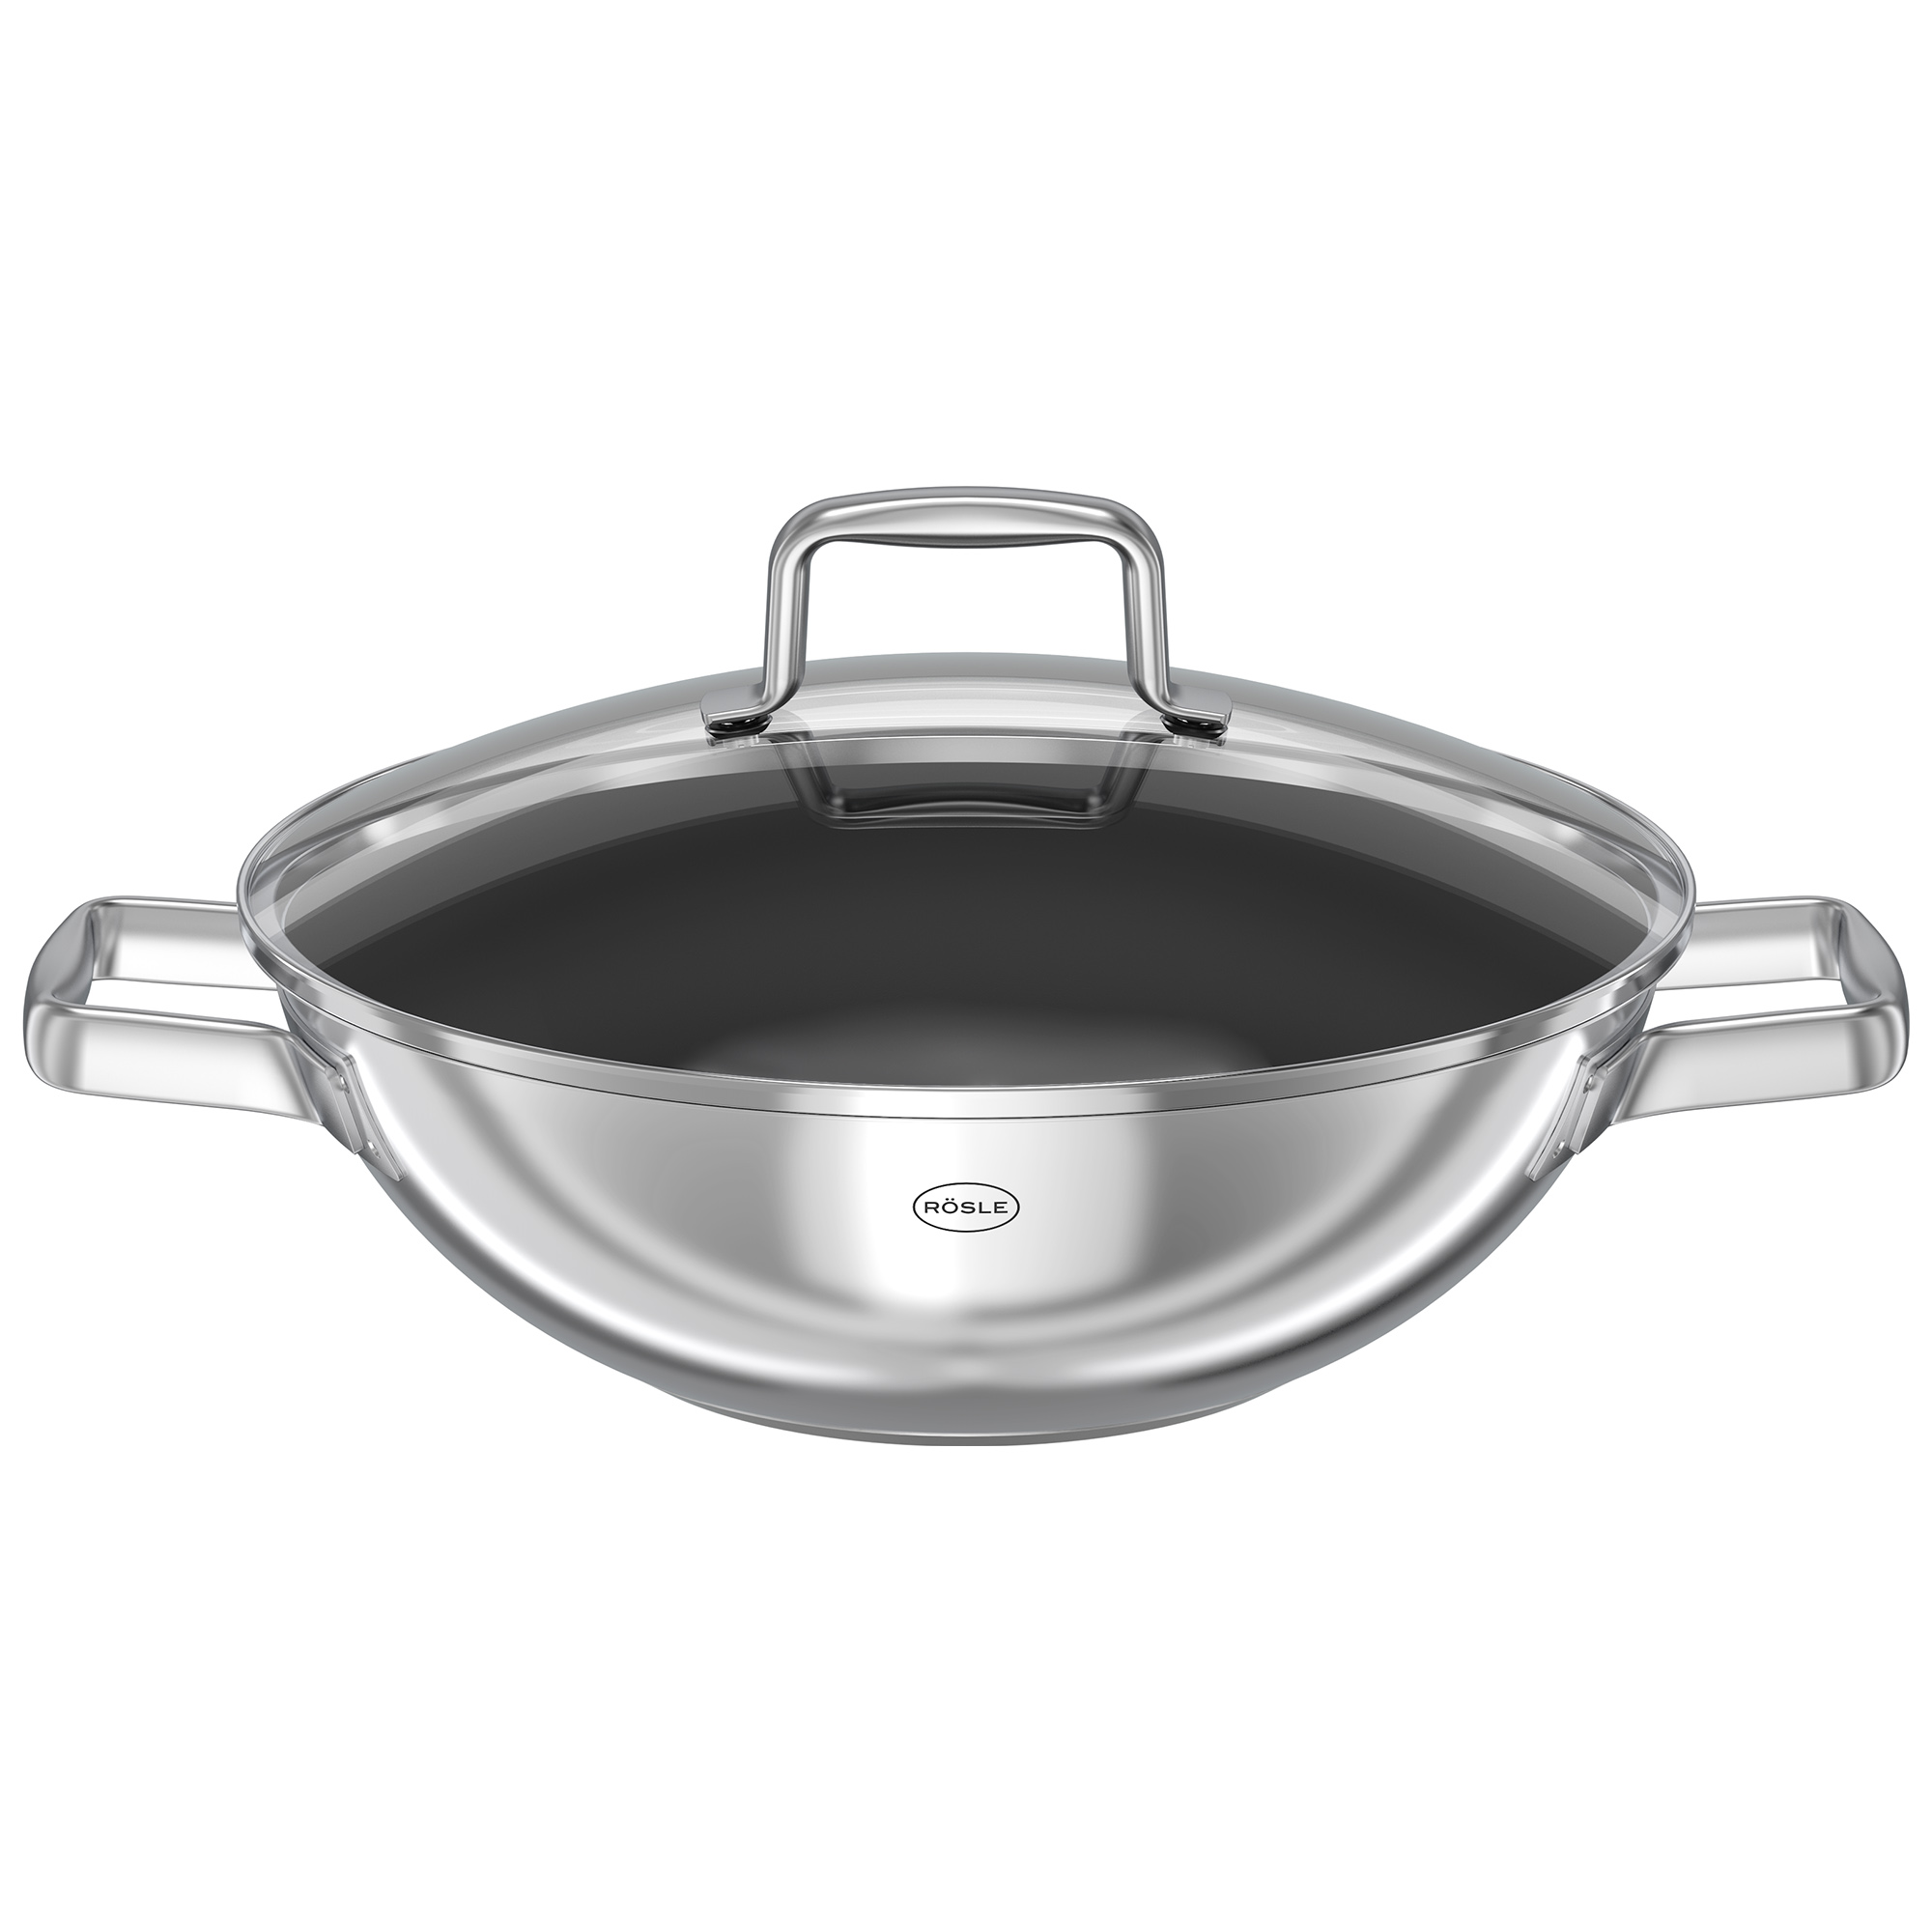 Wok Moments with non-stick coating Ø 28 cm|11.0 in.